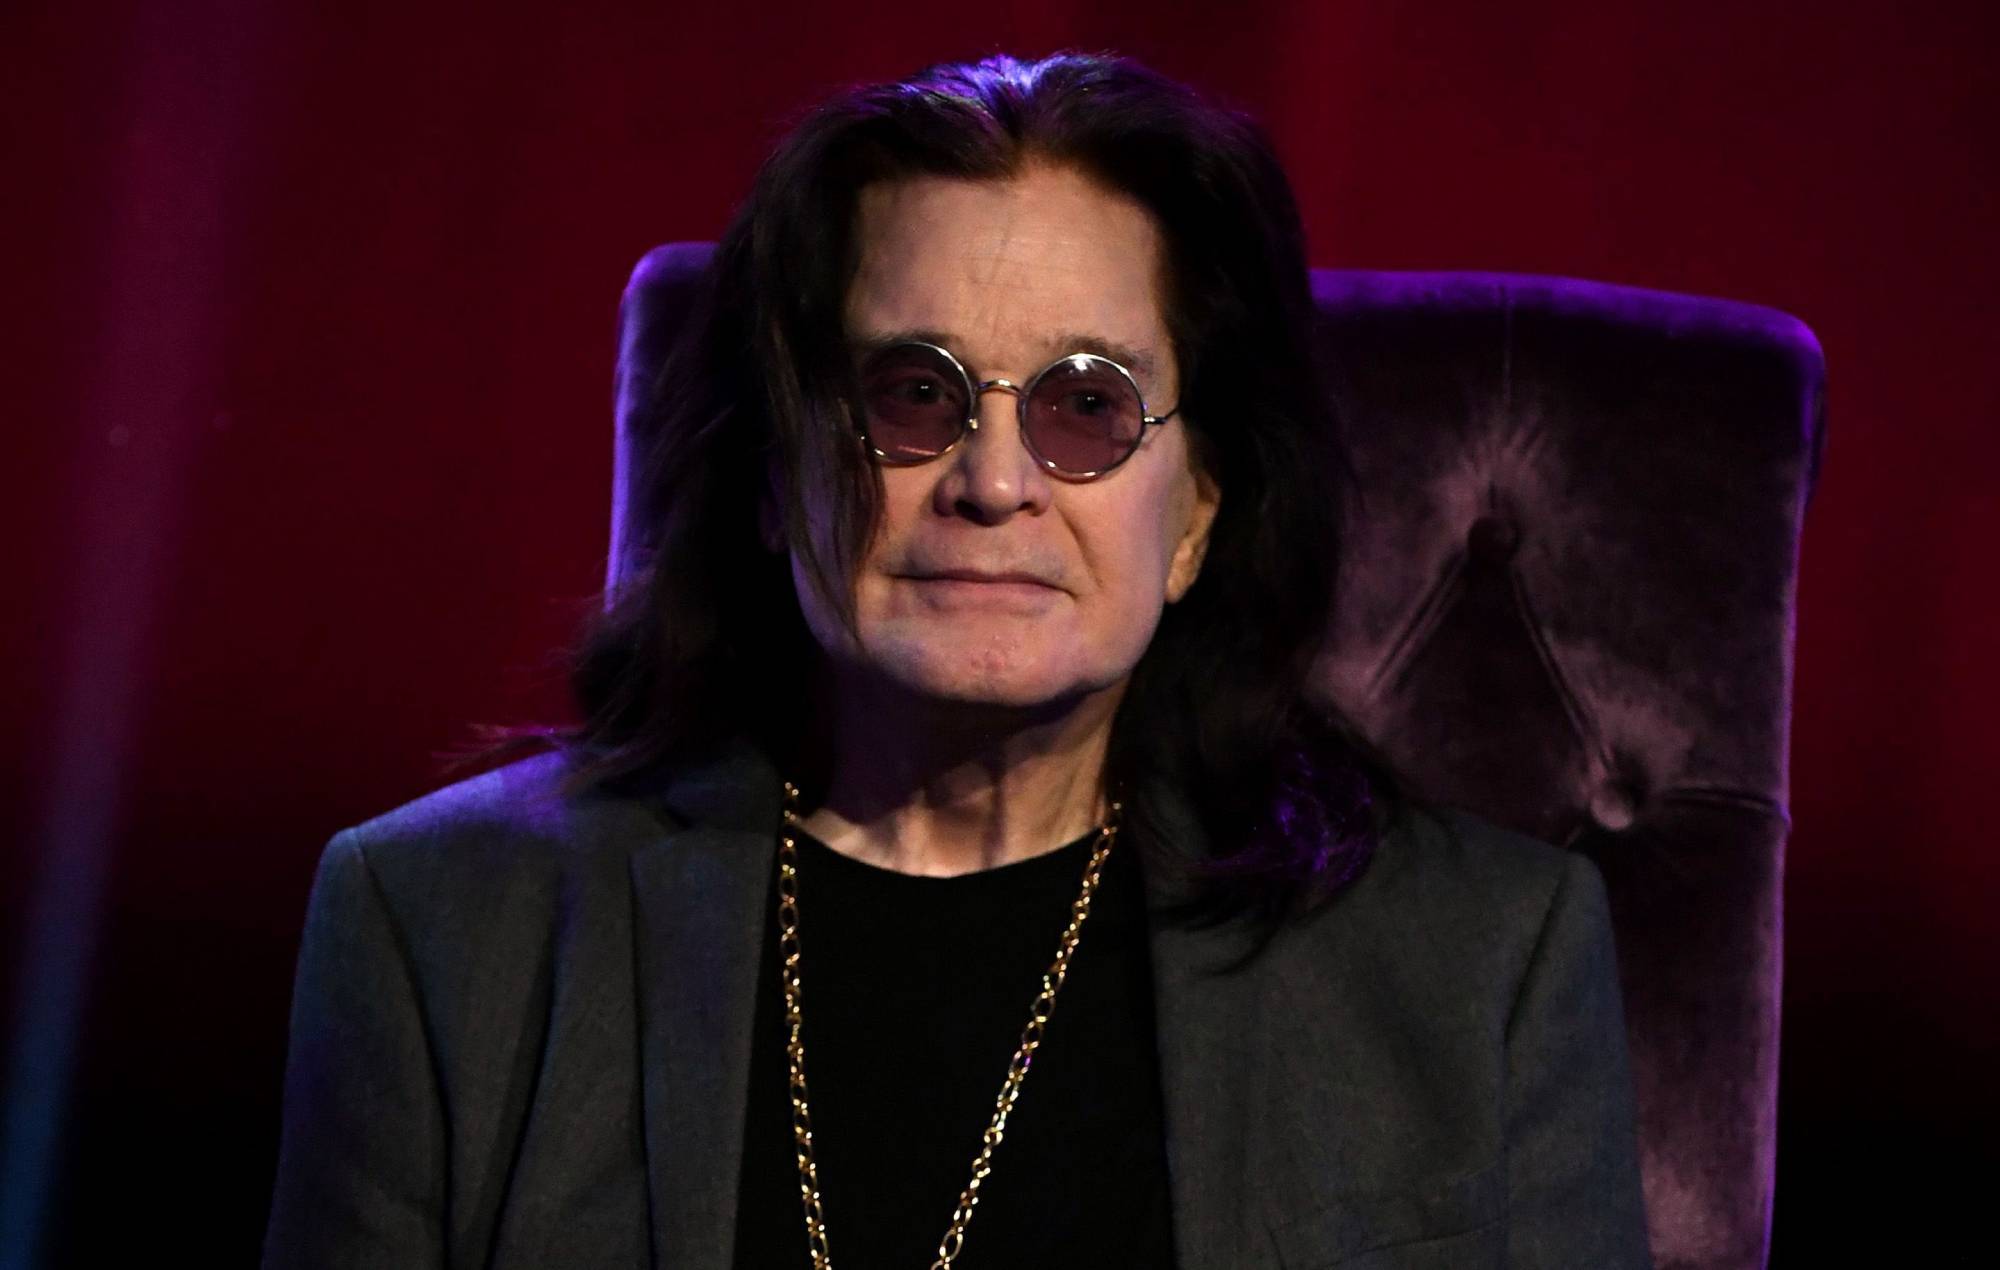 Ozzy Osbourne forced out of convention appearance over health concerns